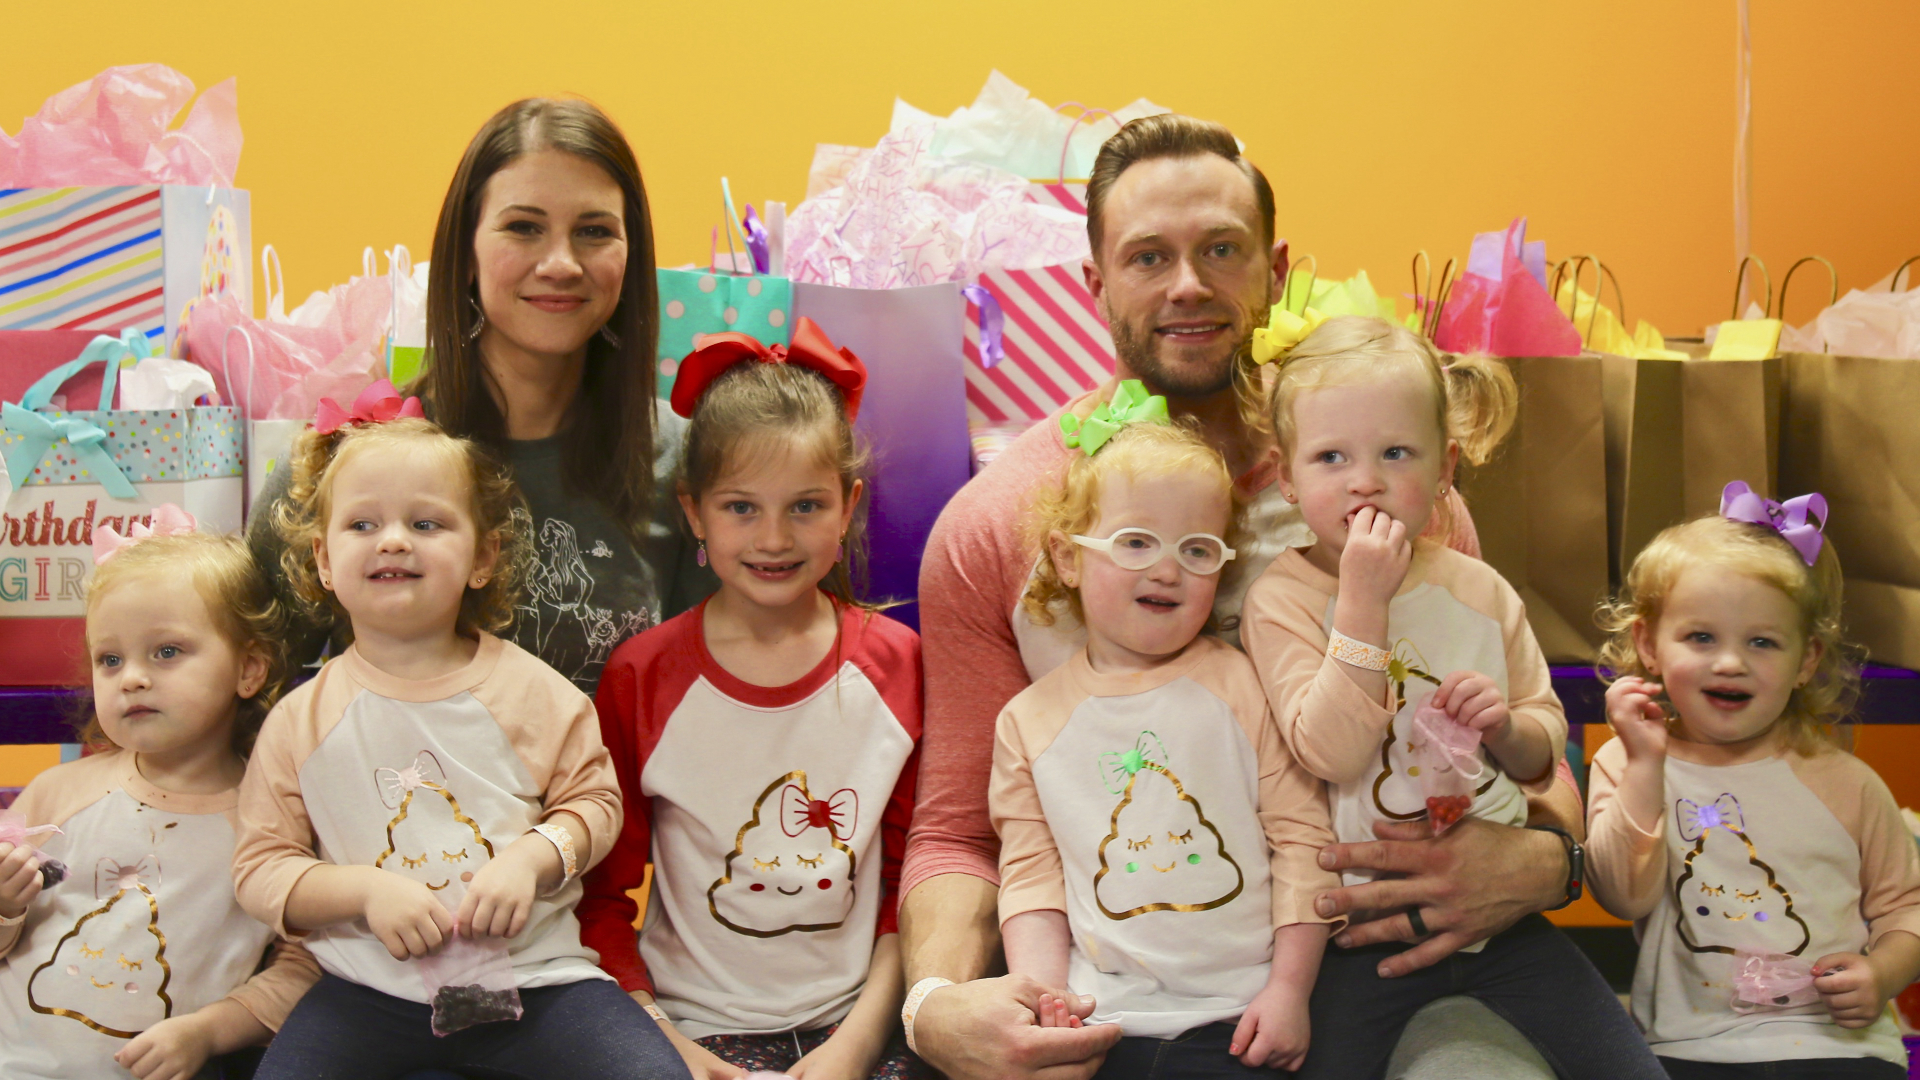 10 Most Memorable Outdaughtered Moments Ranked